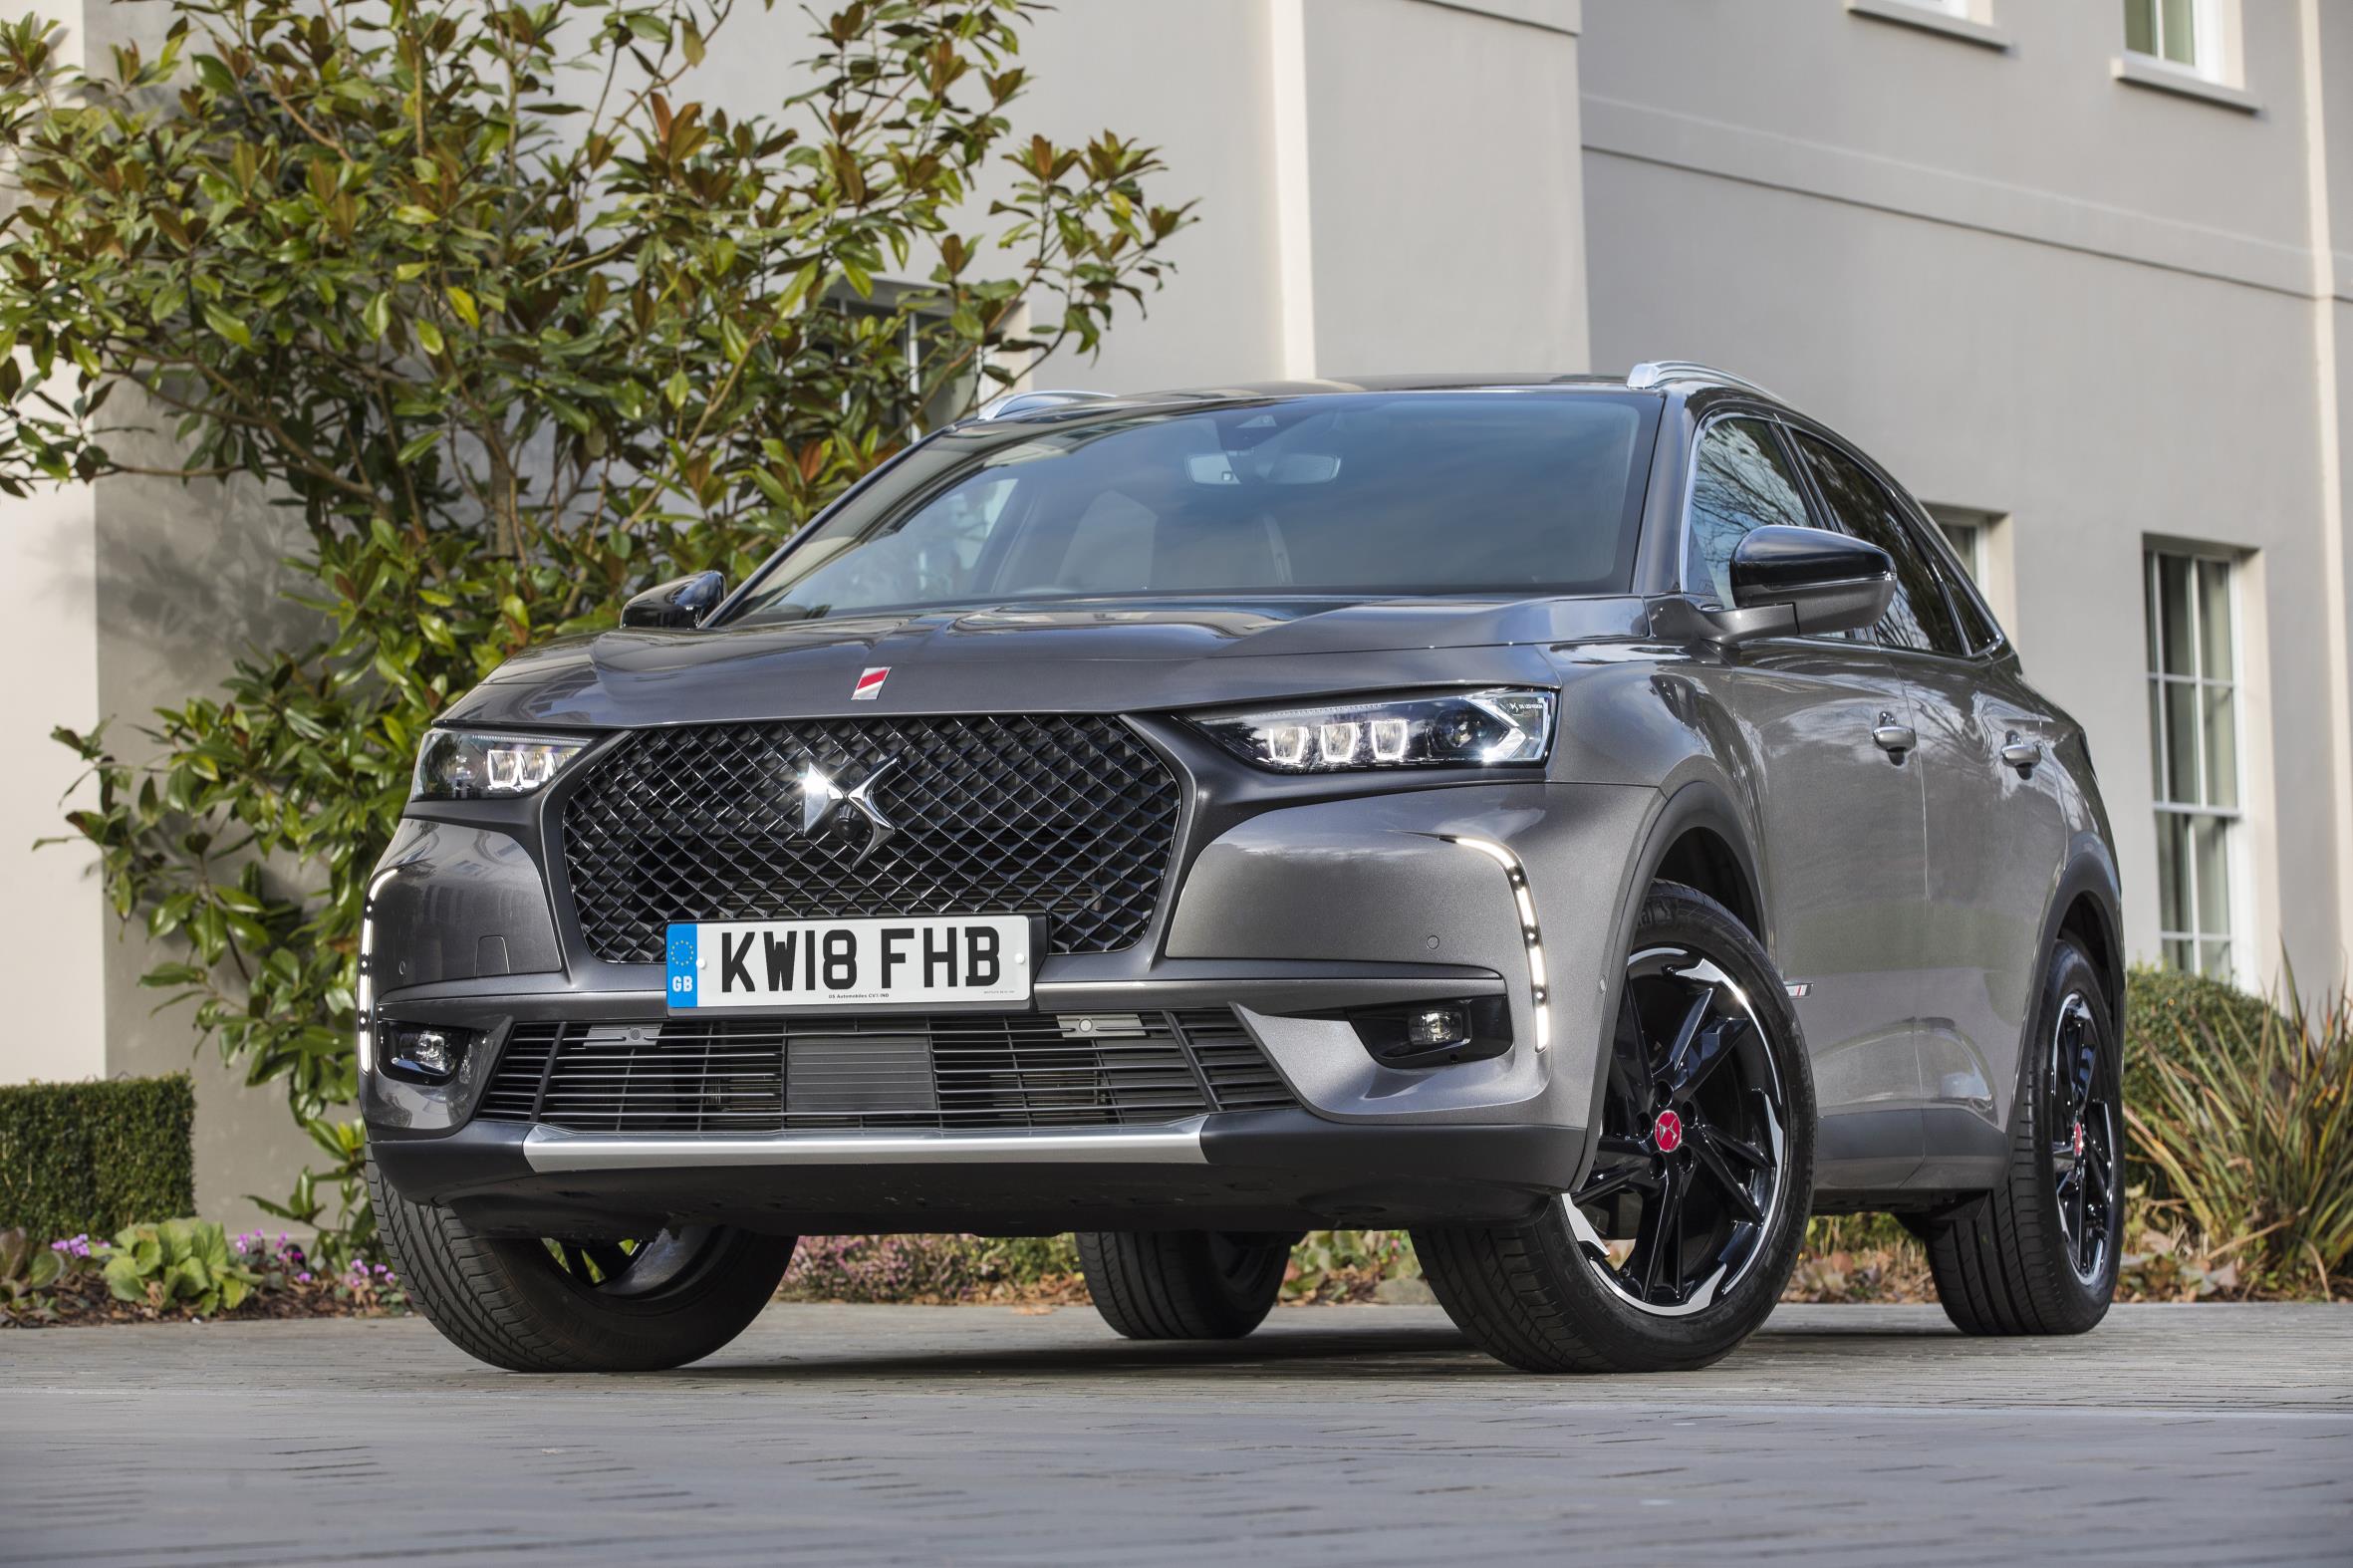 All-new DS 7 Crossback launches in Europe, hybrid coming in 2019